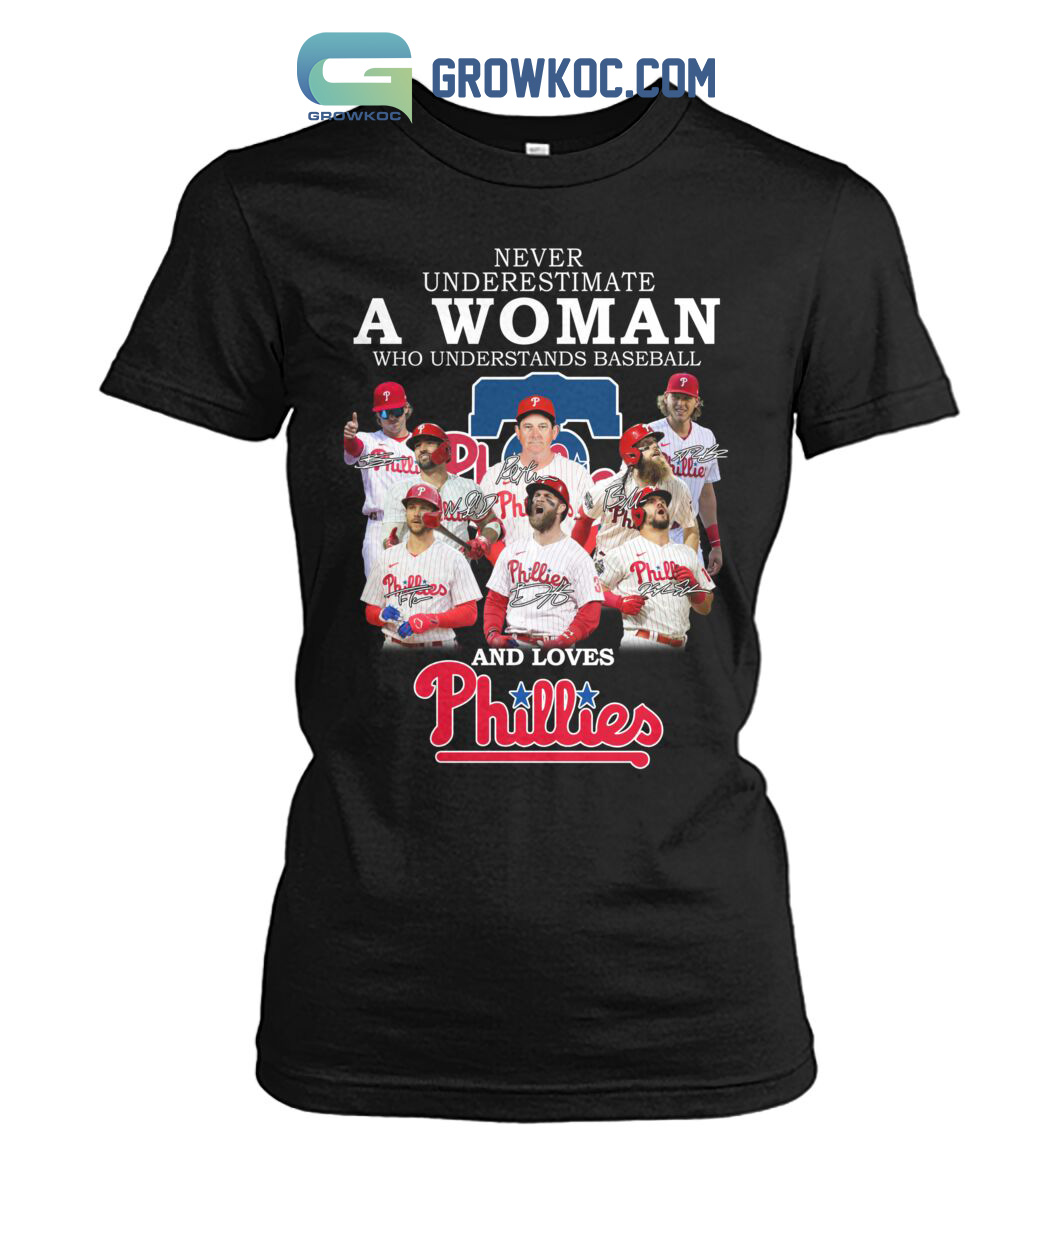 Never underestimate a woman who understands baseball and loves Twins shirt,  hoodie, sweatshirt and tank top